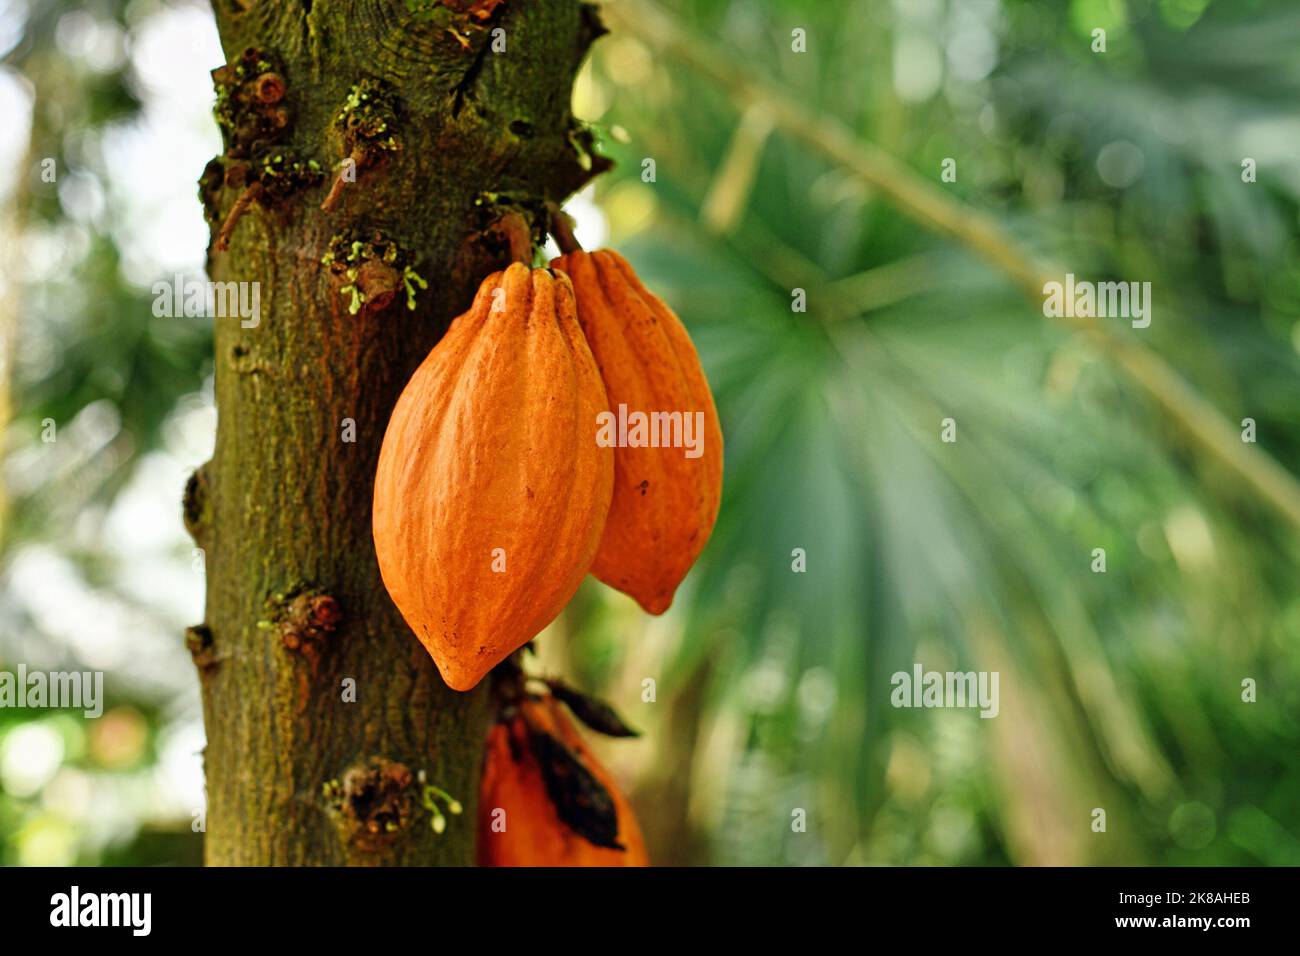 Orange cocoa pods with beans hanging on 'Theobroma Cacao' Cacao tree Stock Photo